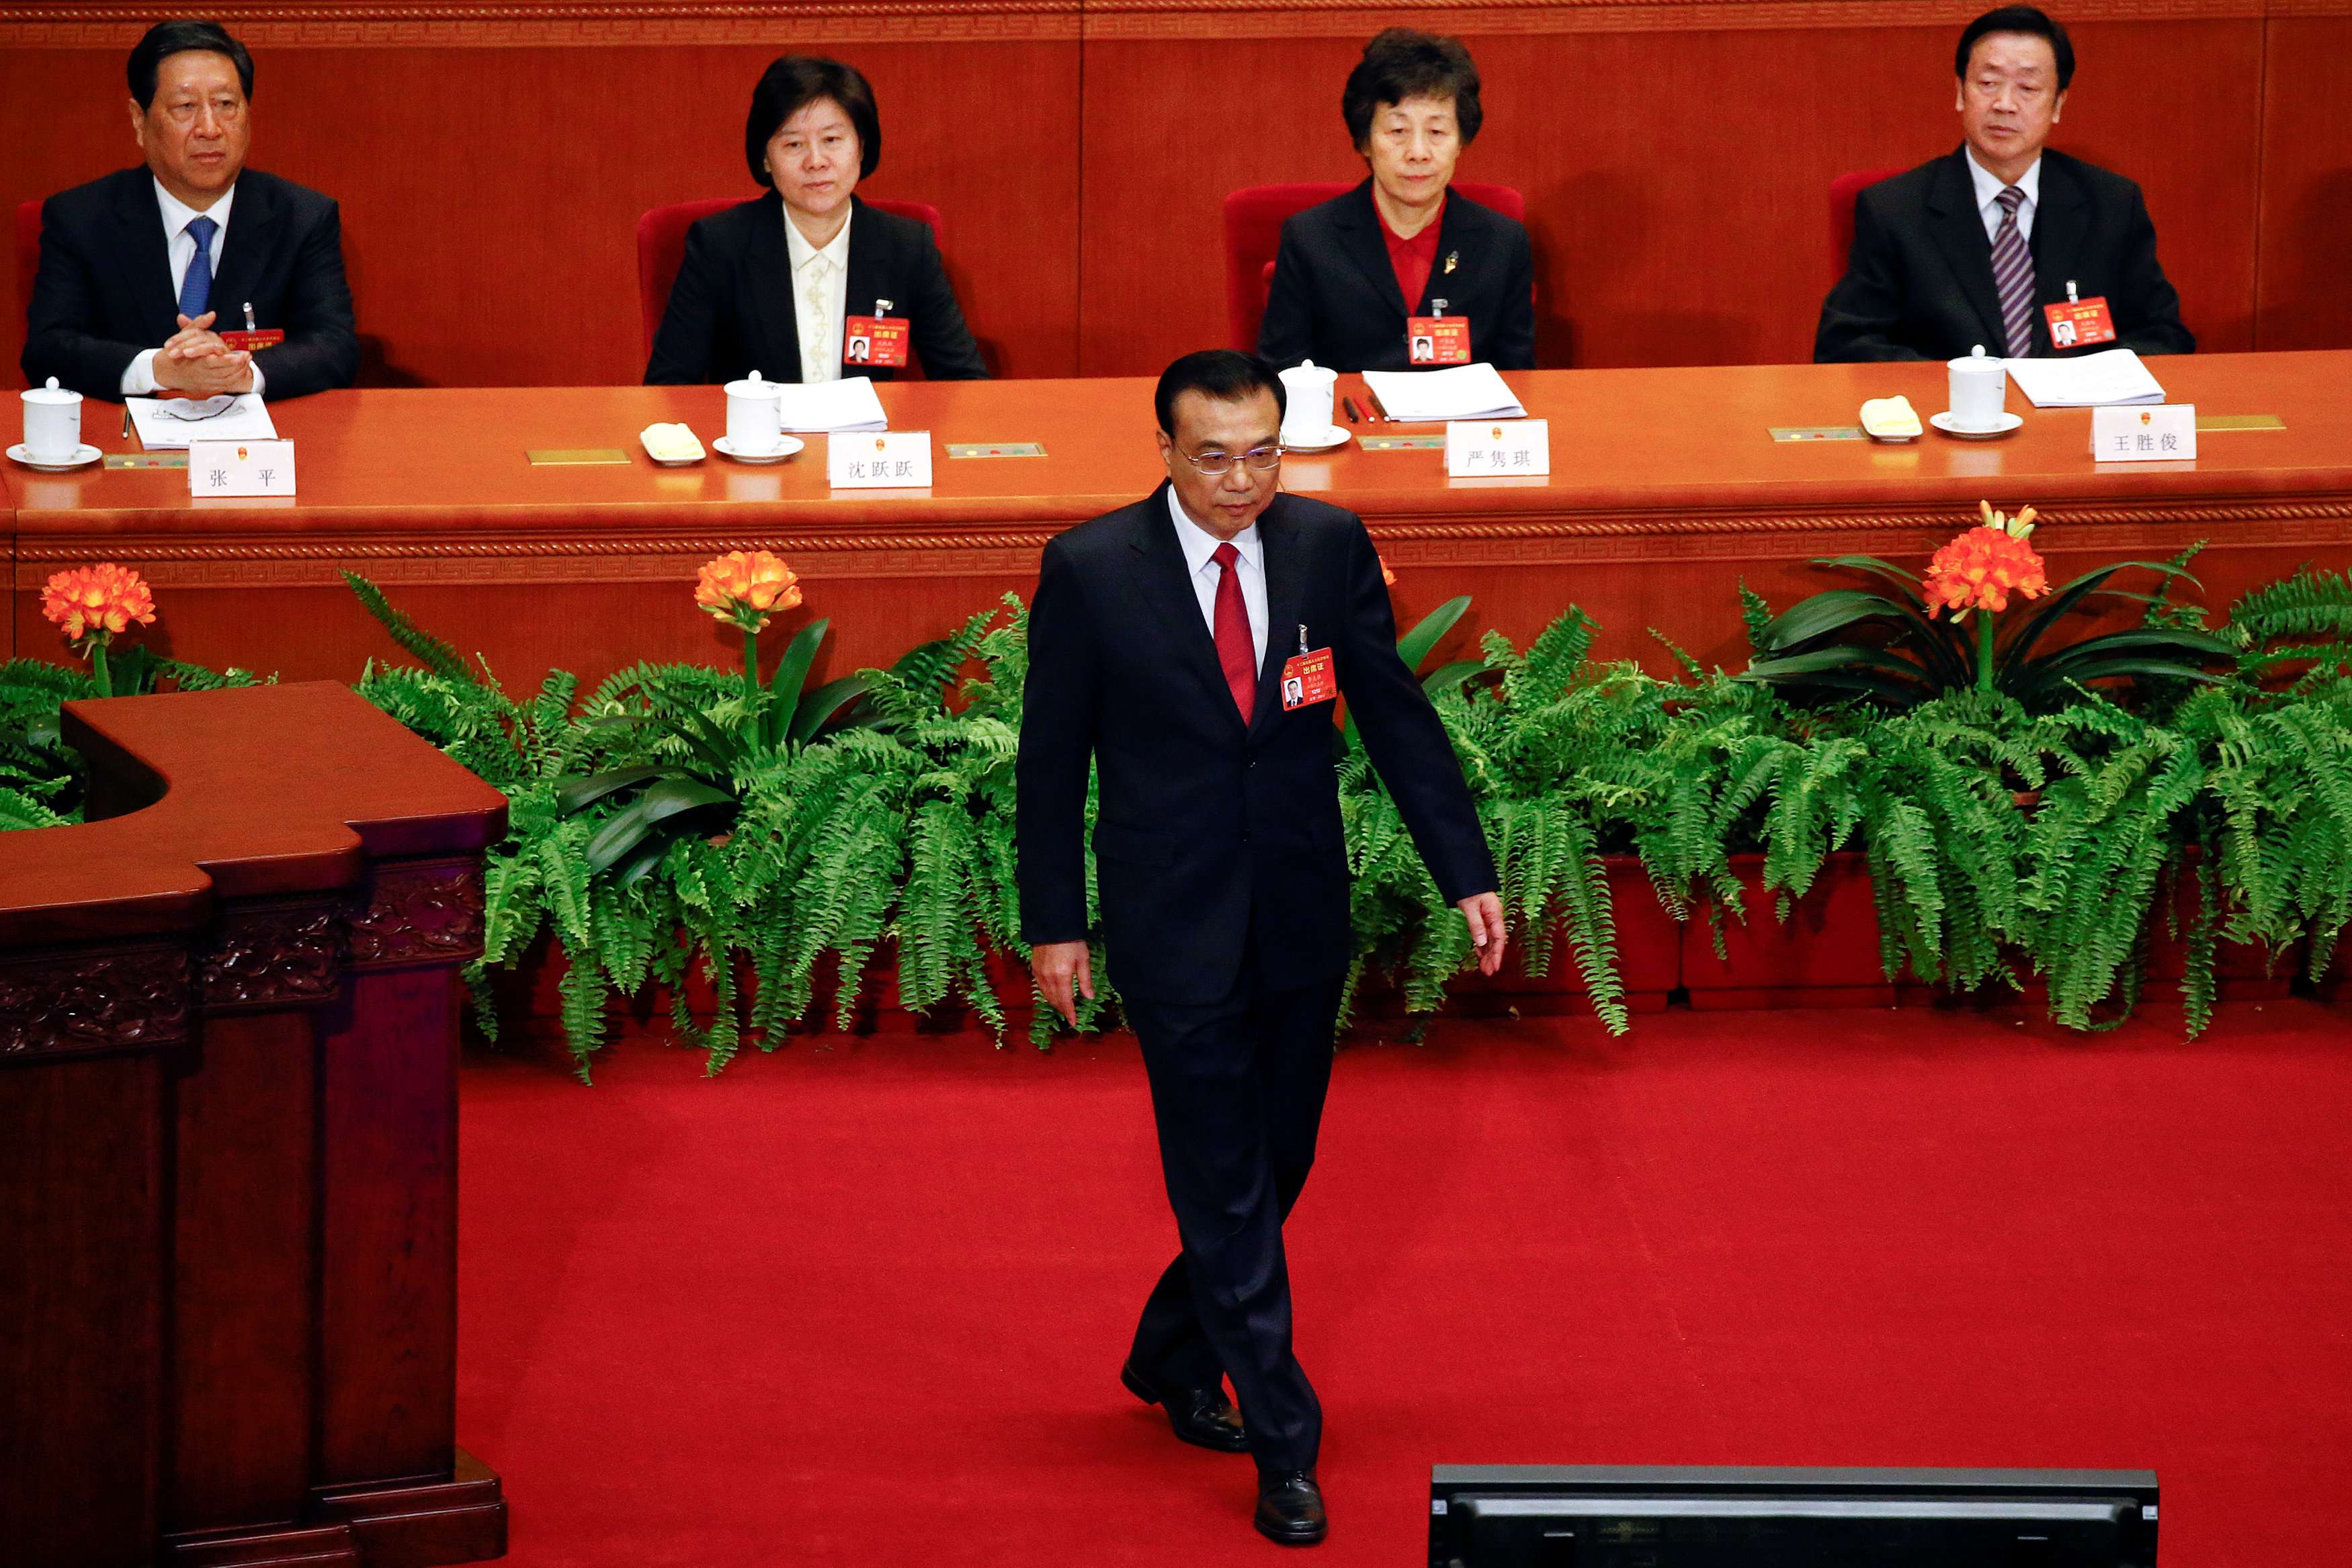 Premier Li Keqiang walks onstage to deliver a government work report during the opening session of the National People's Congress. Photo: Reuters